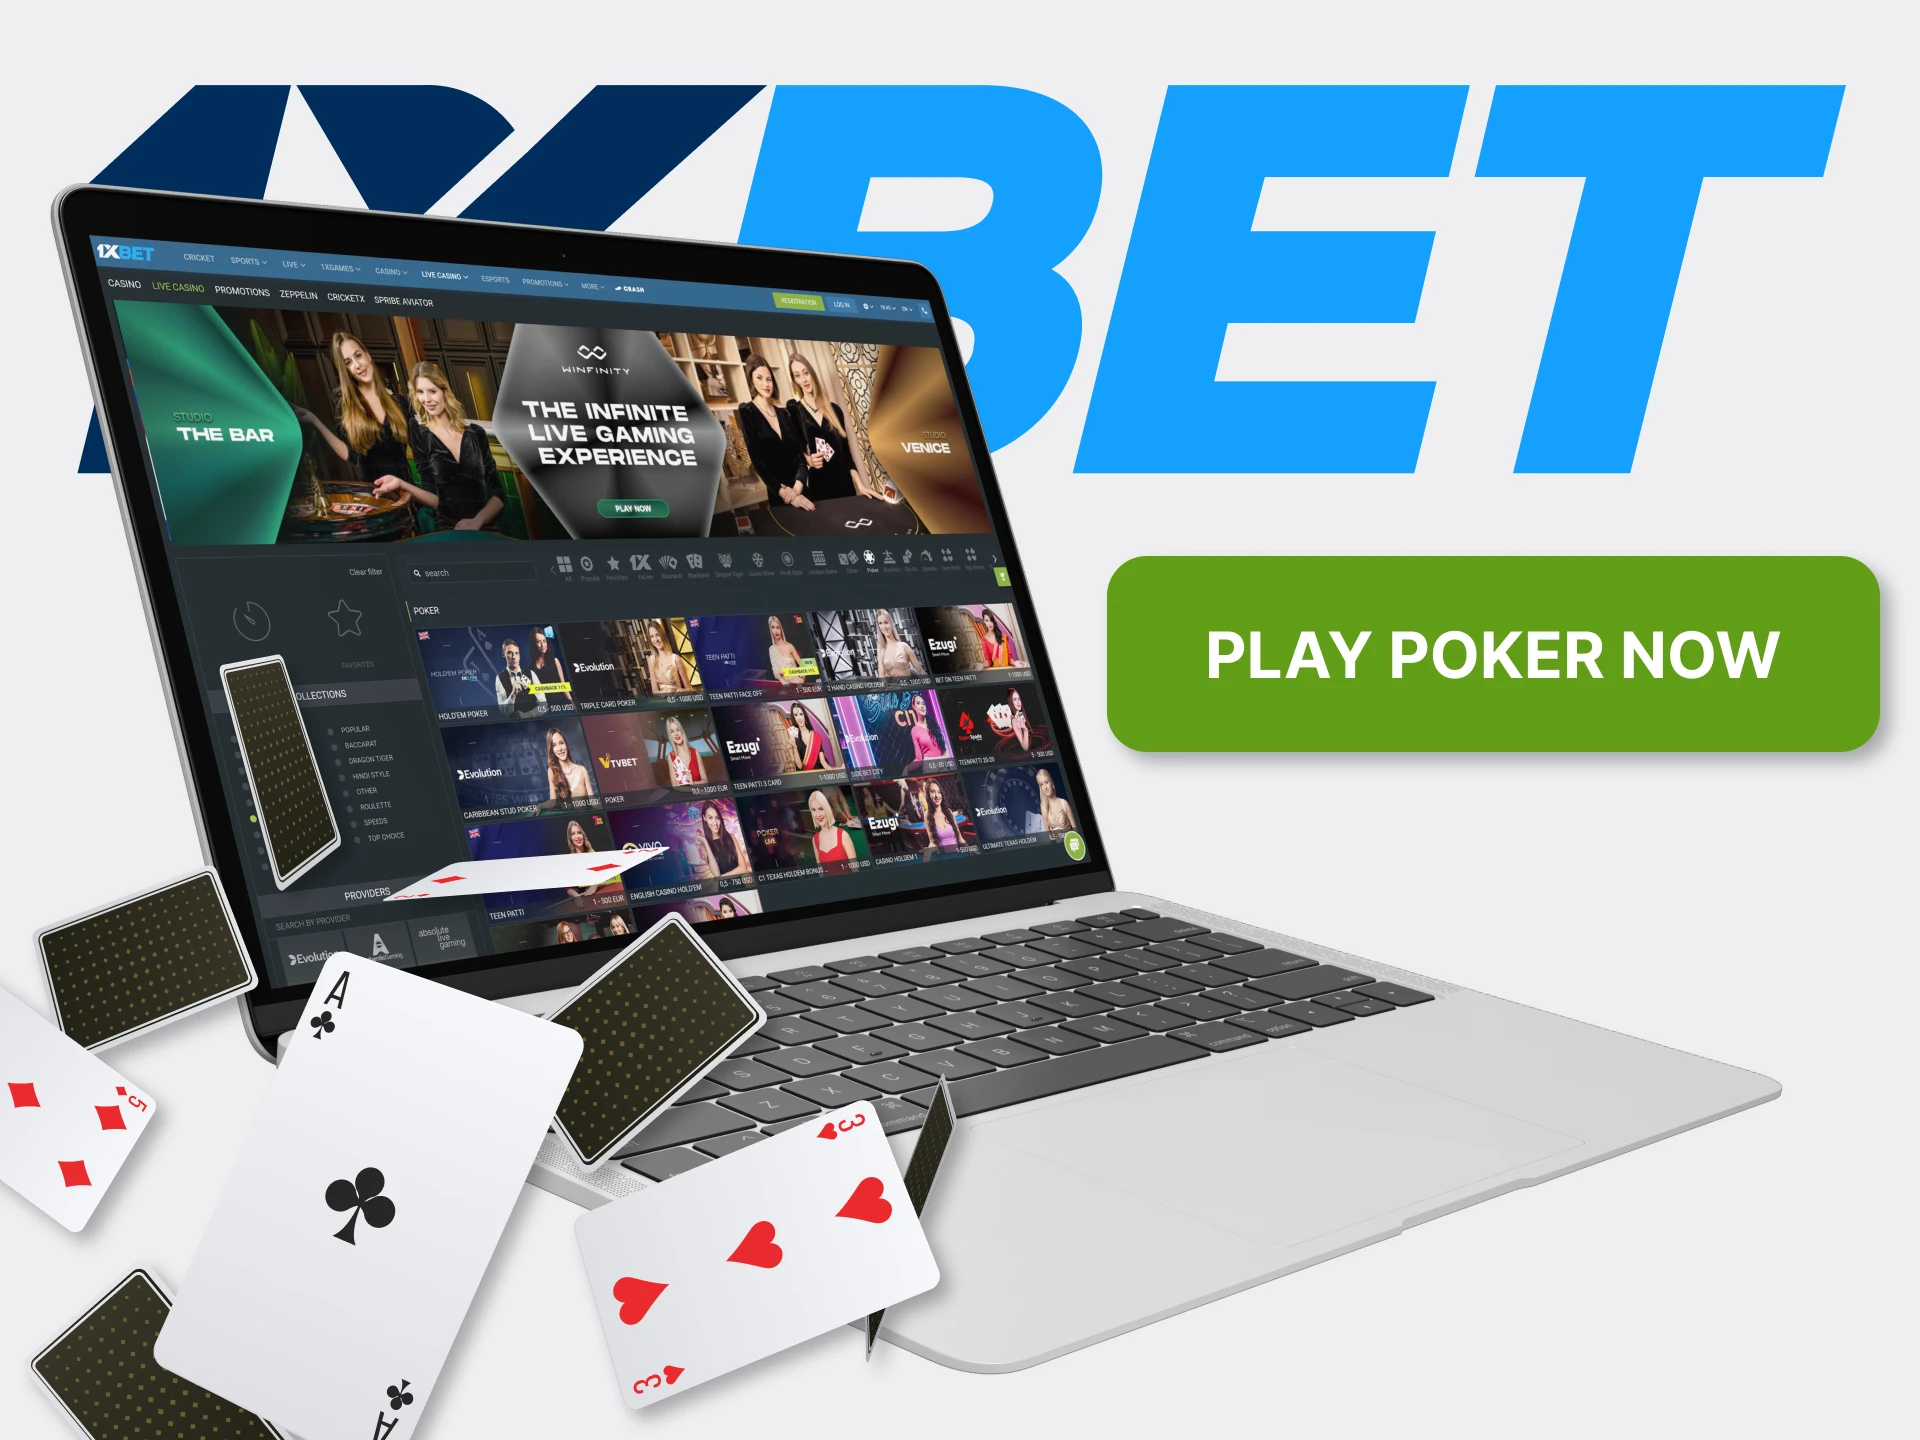 Play poker at 1xBet Live Casino.